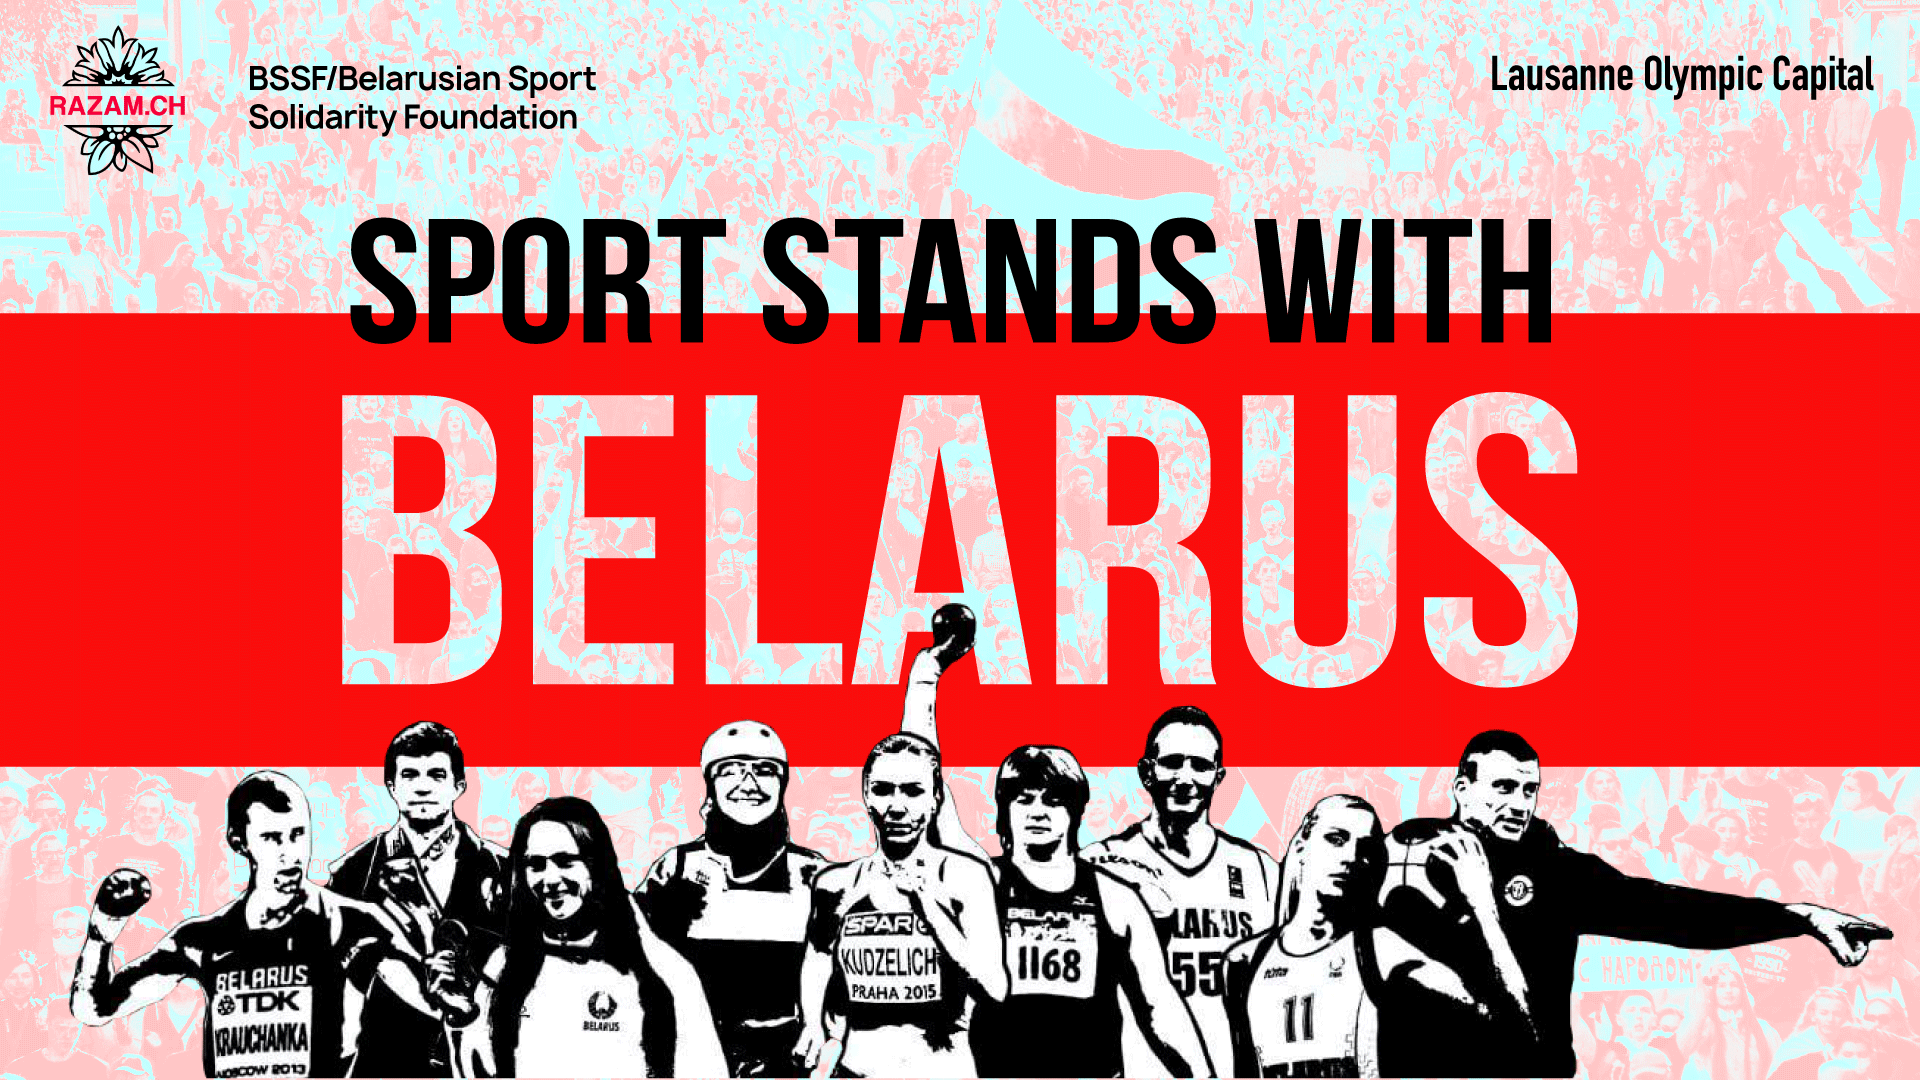 Exclusive: Belarusian groups in Switzerland to hold protest against Lukashenko in Olympic capital